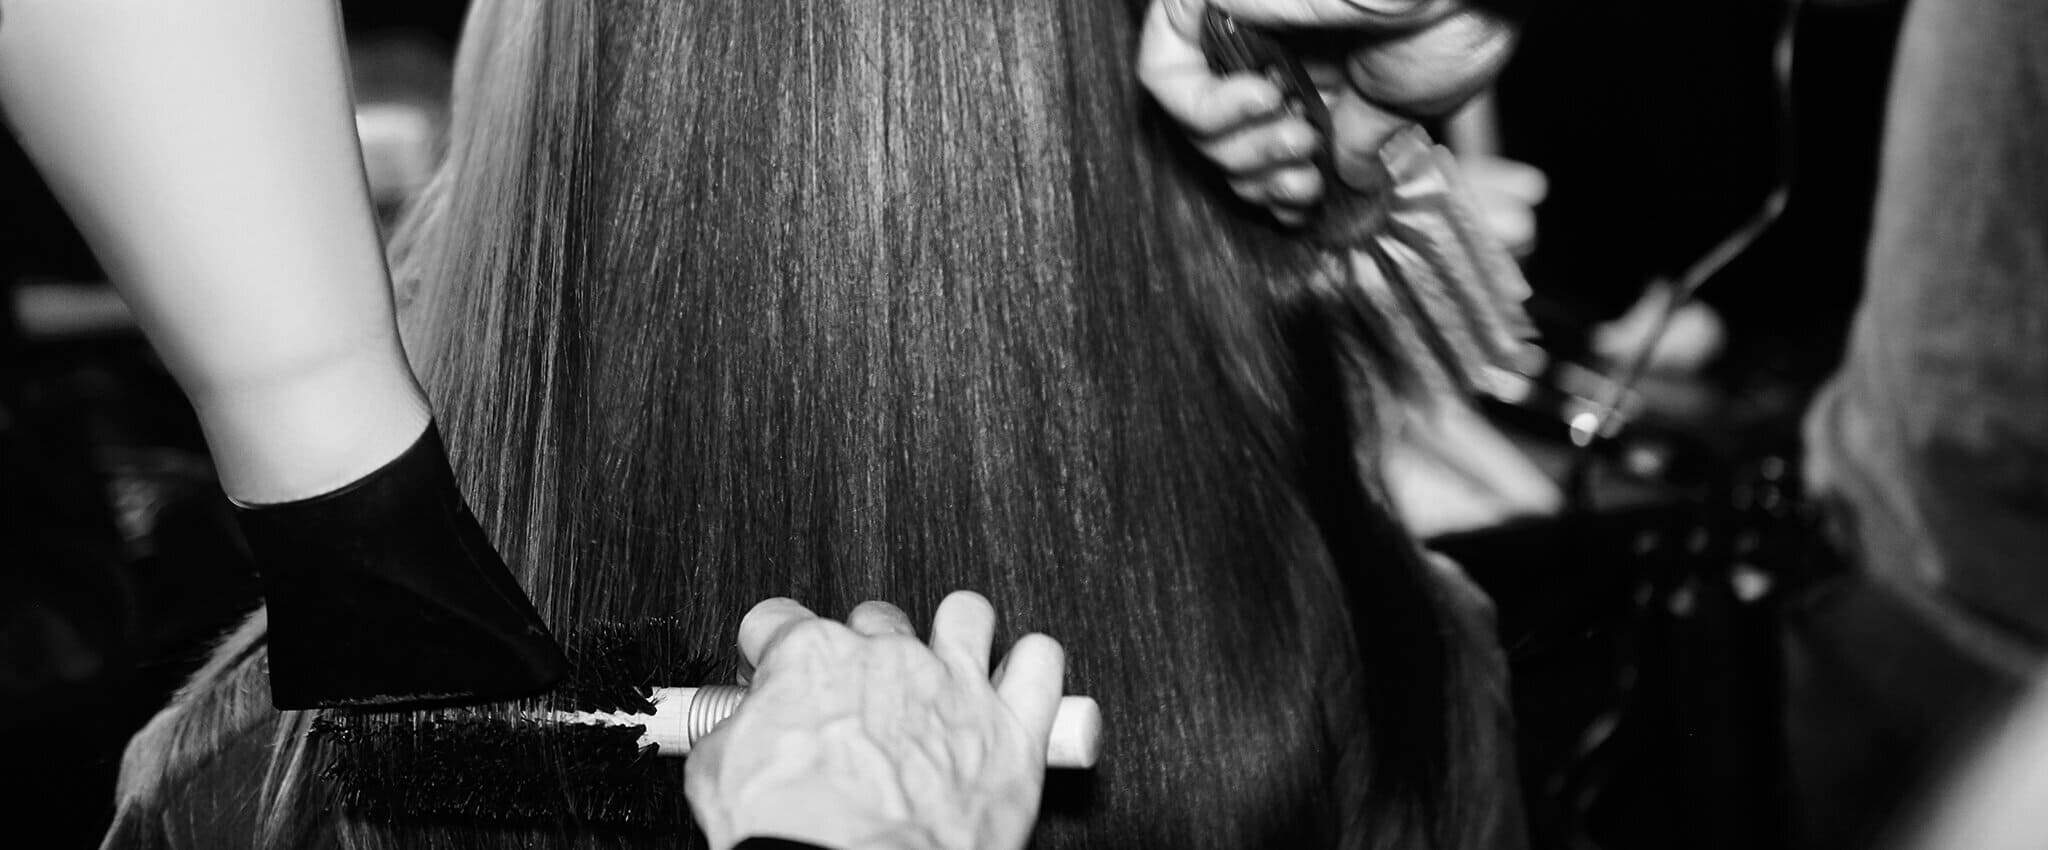 A section of long dark, damaged hair being styled with heat tongs.